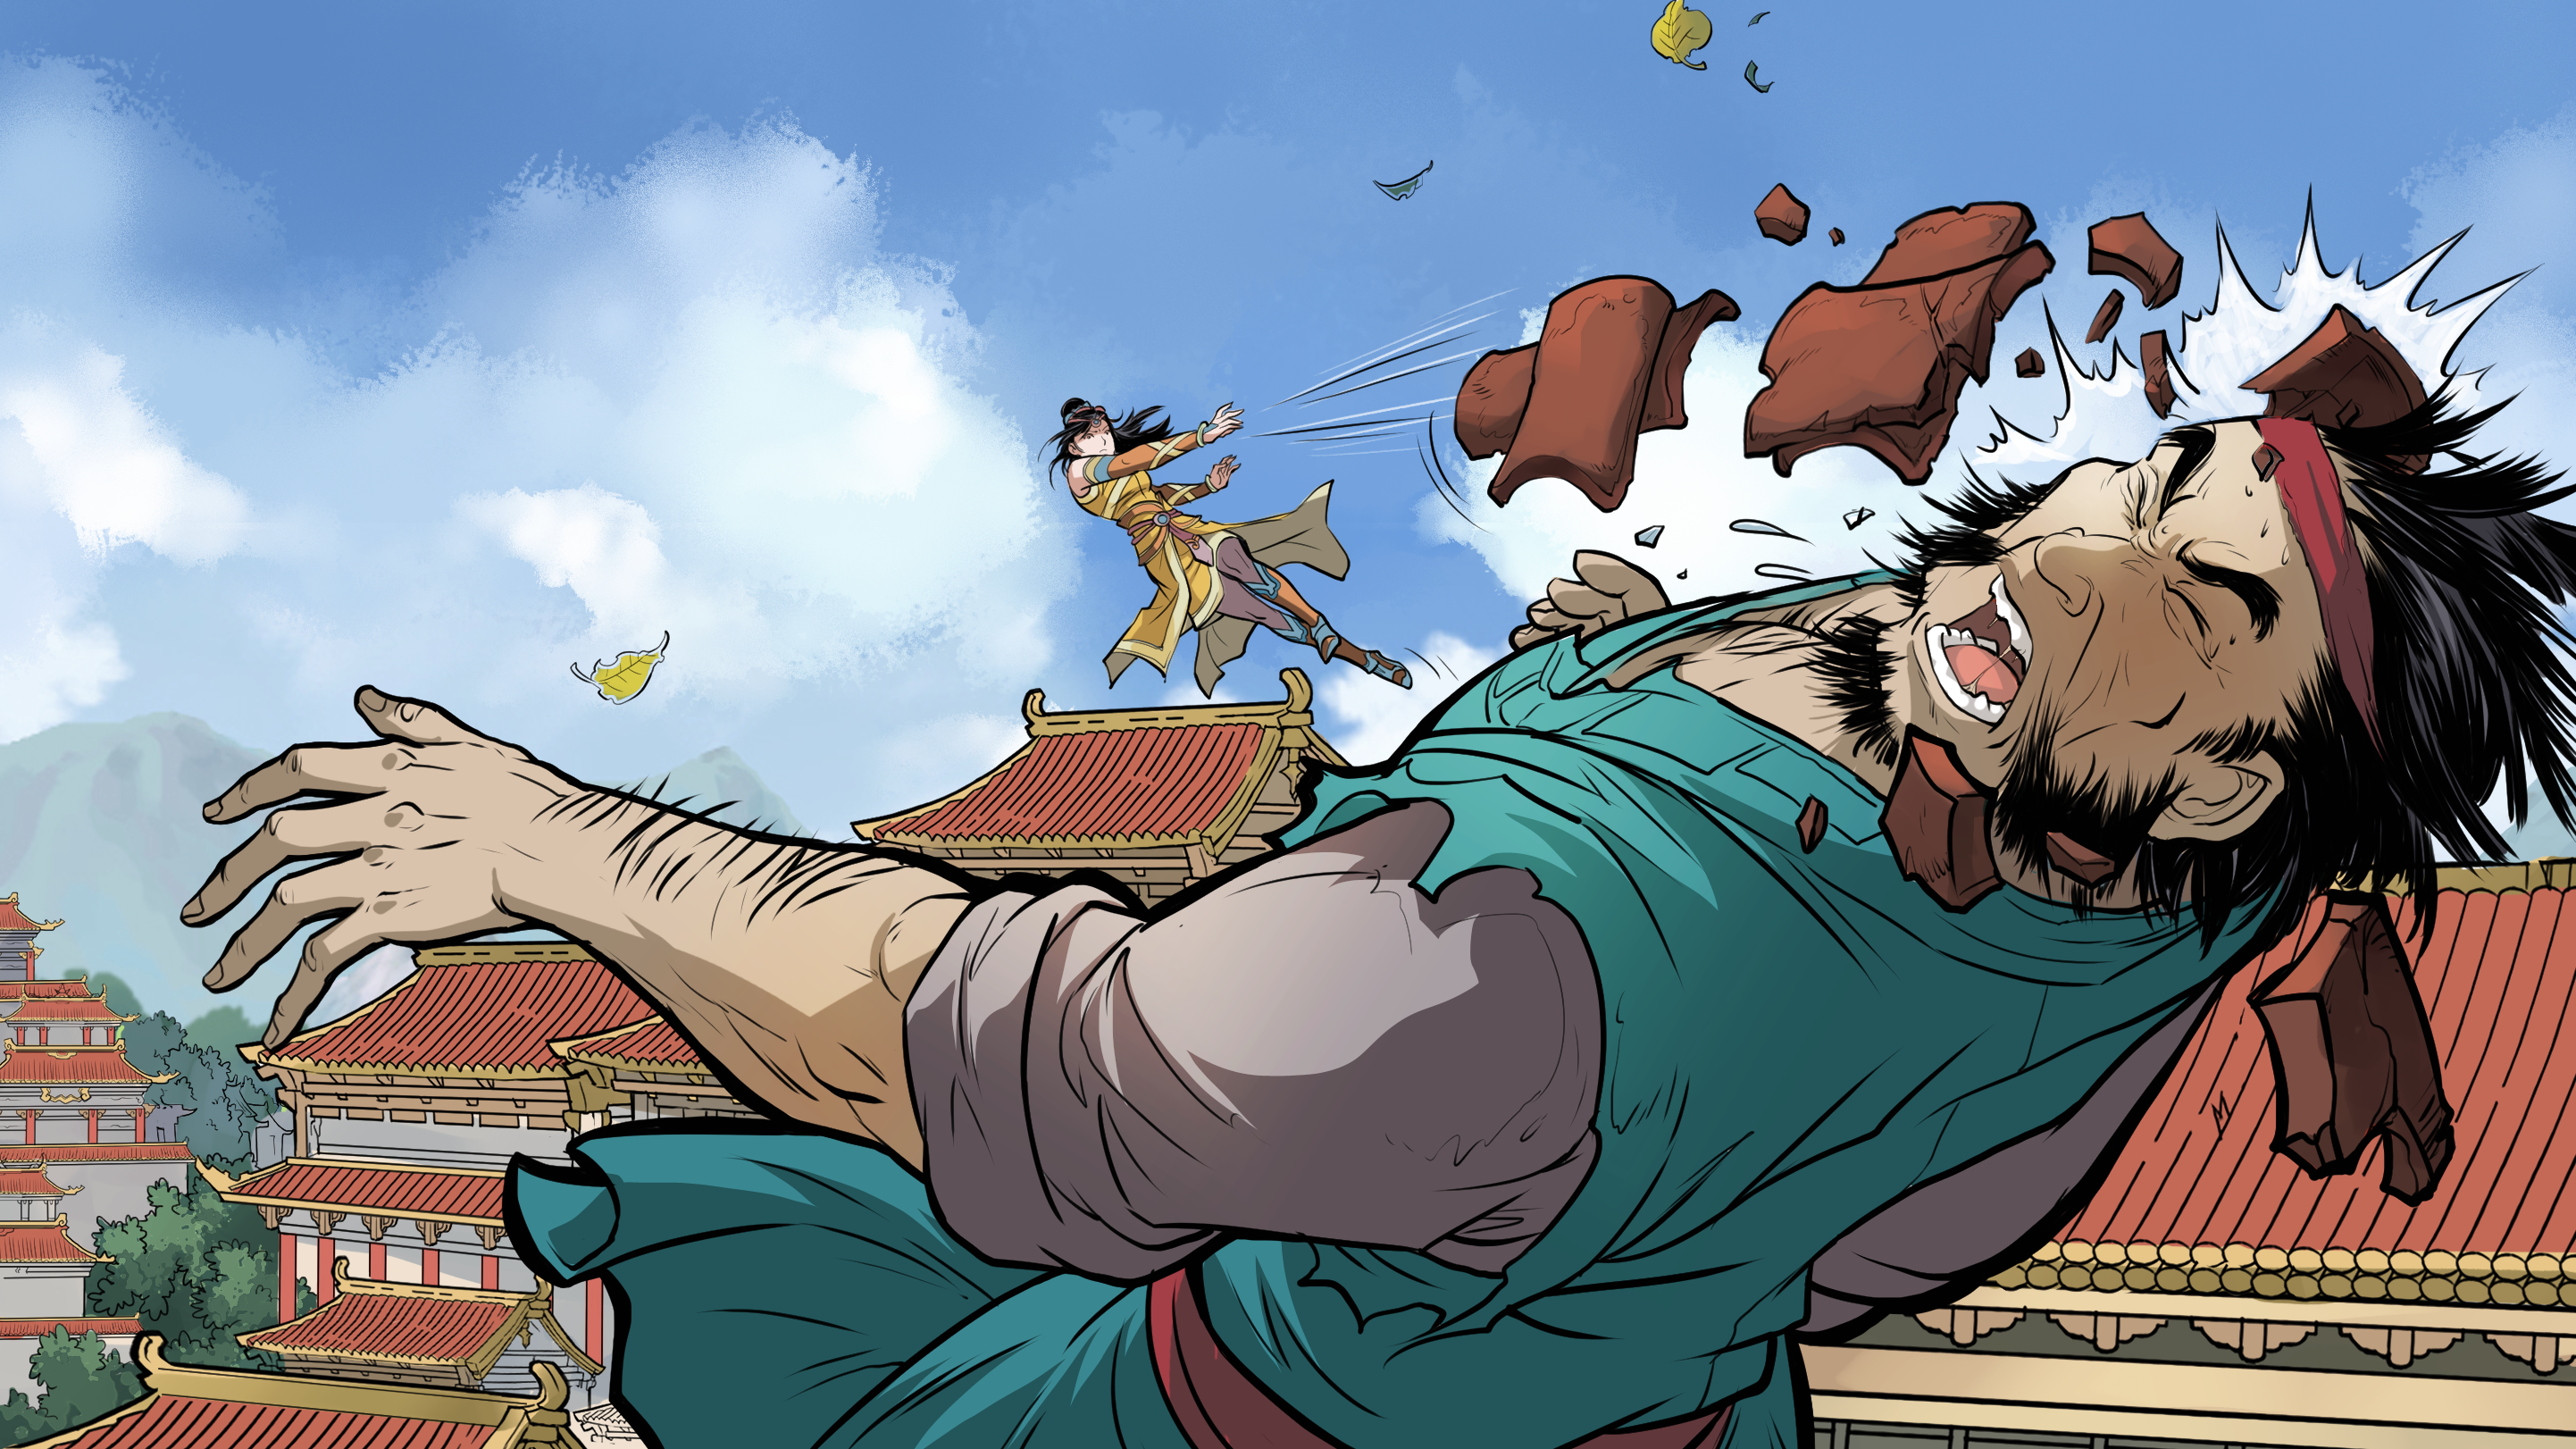 Shuyan makes an escape on the rooftops in the narrative story mode.